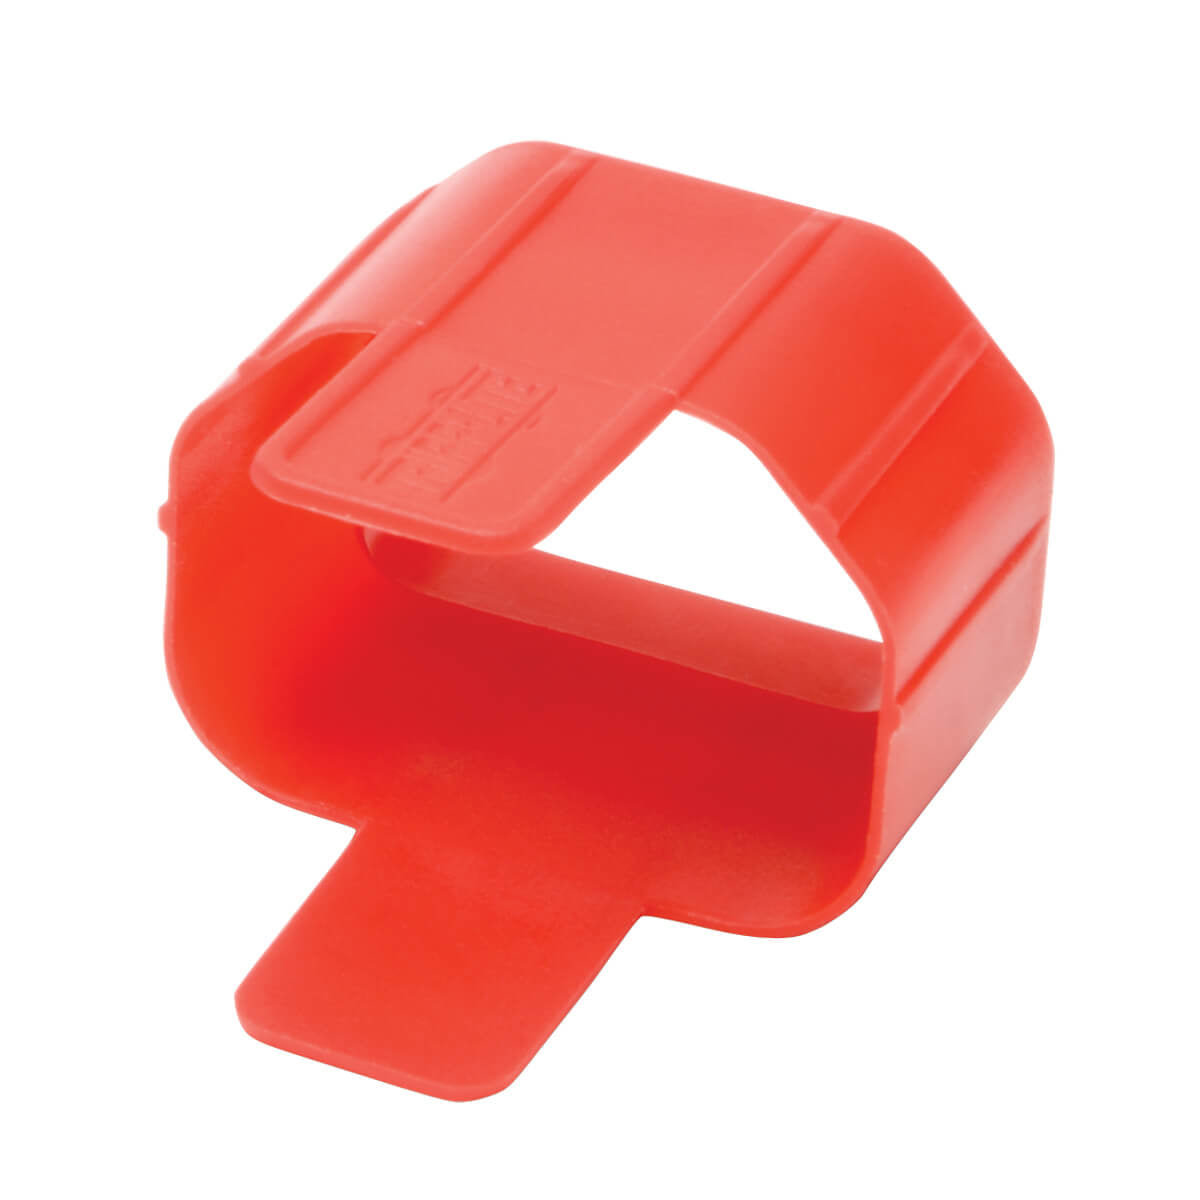 Tripp Lite PLC13RD Plug-Lock Inserts (C14 power cord to C13 outlet), Red, 100 pack